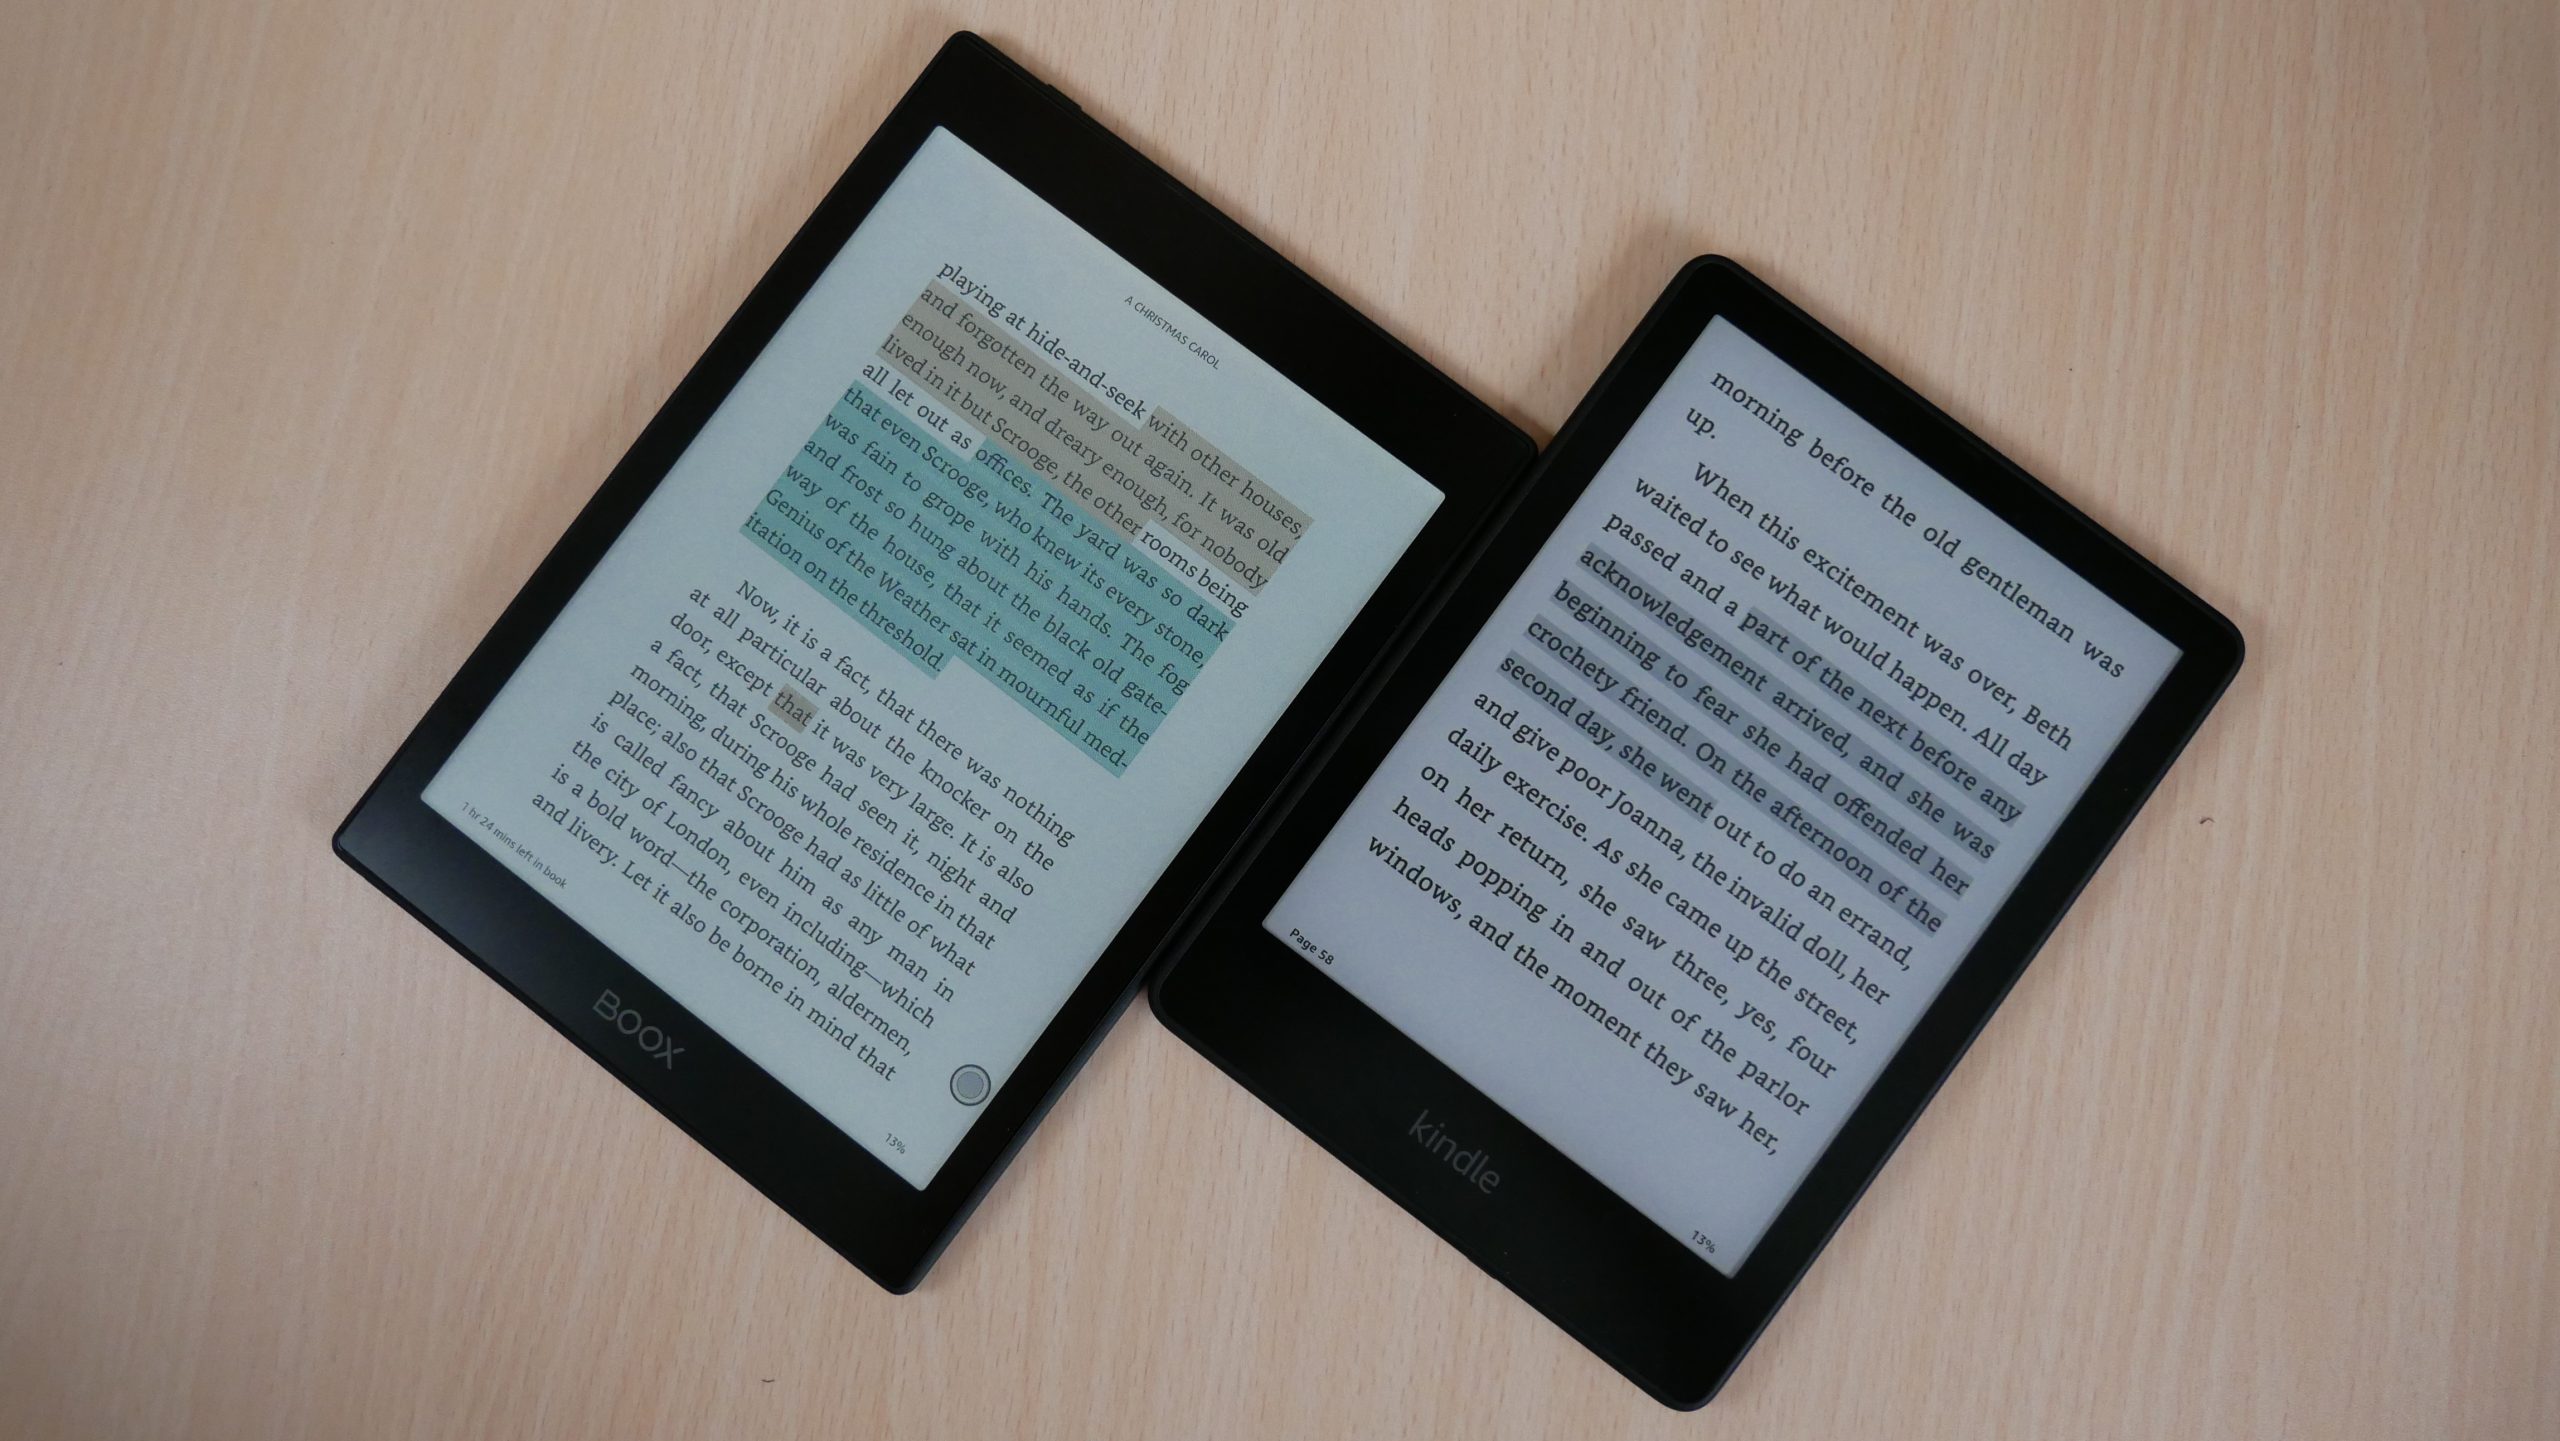 Review: 's Kindle Paperwhite Signature Edition excels